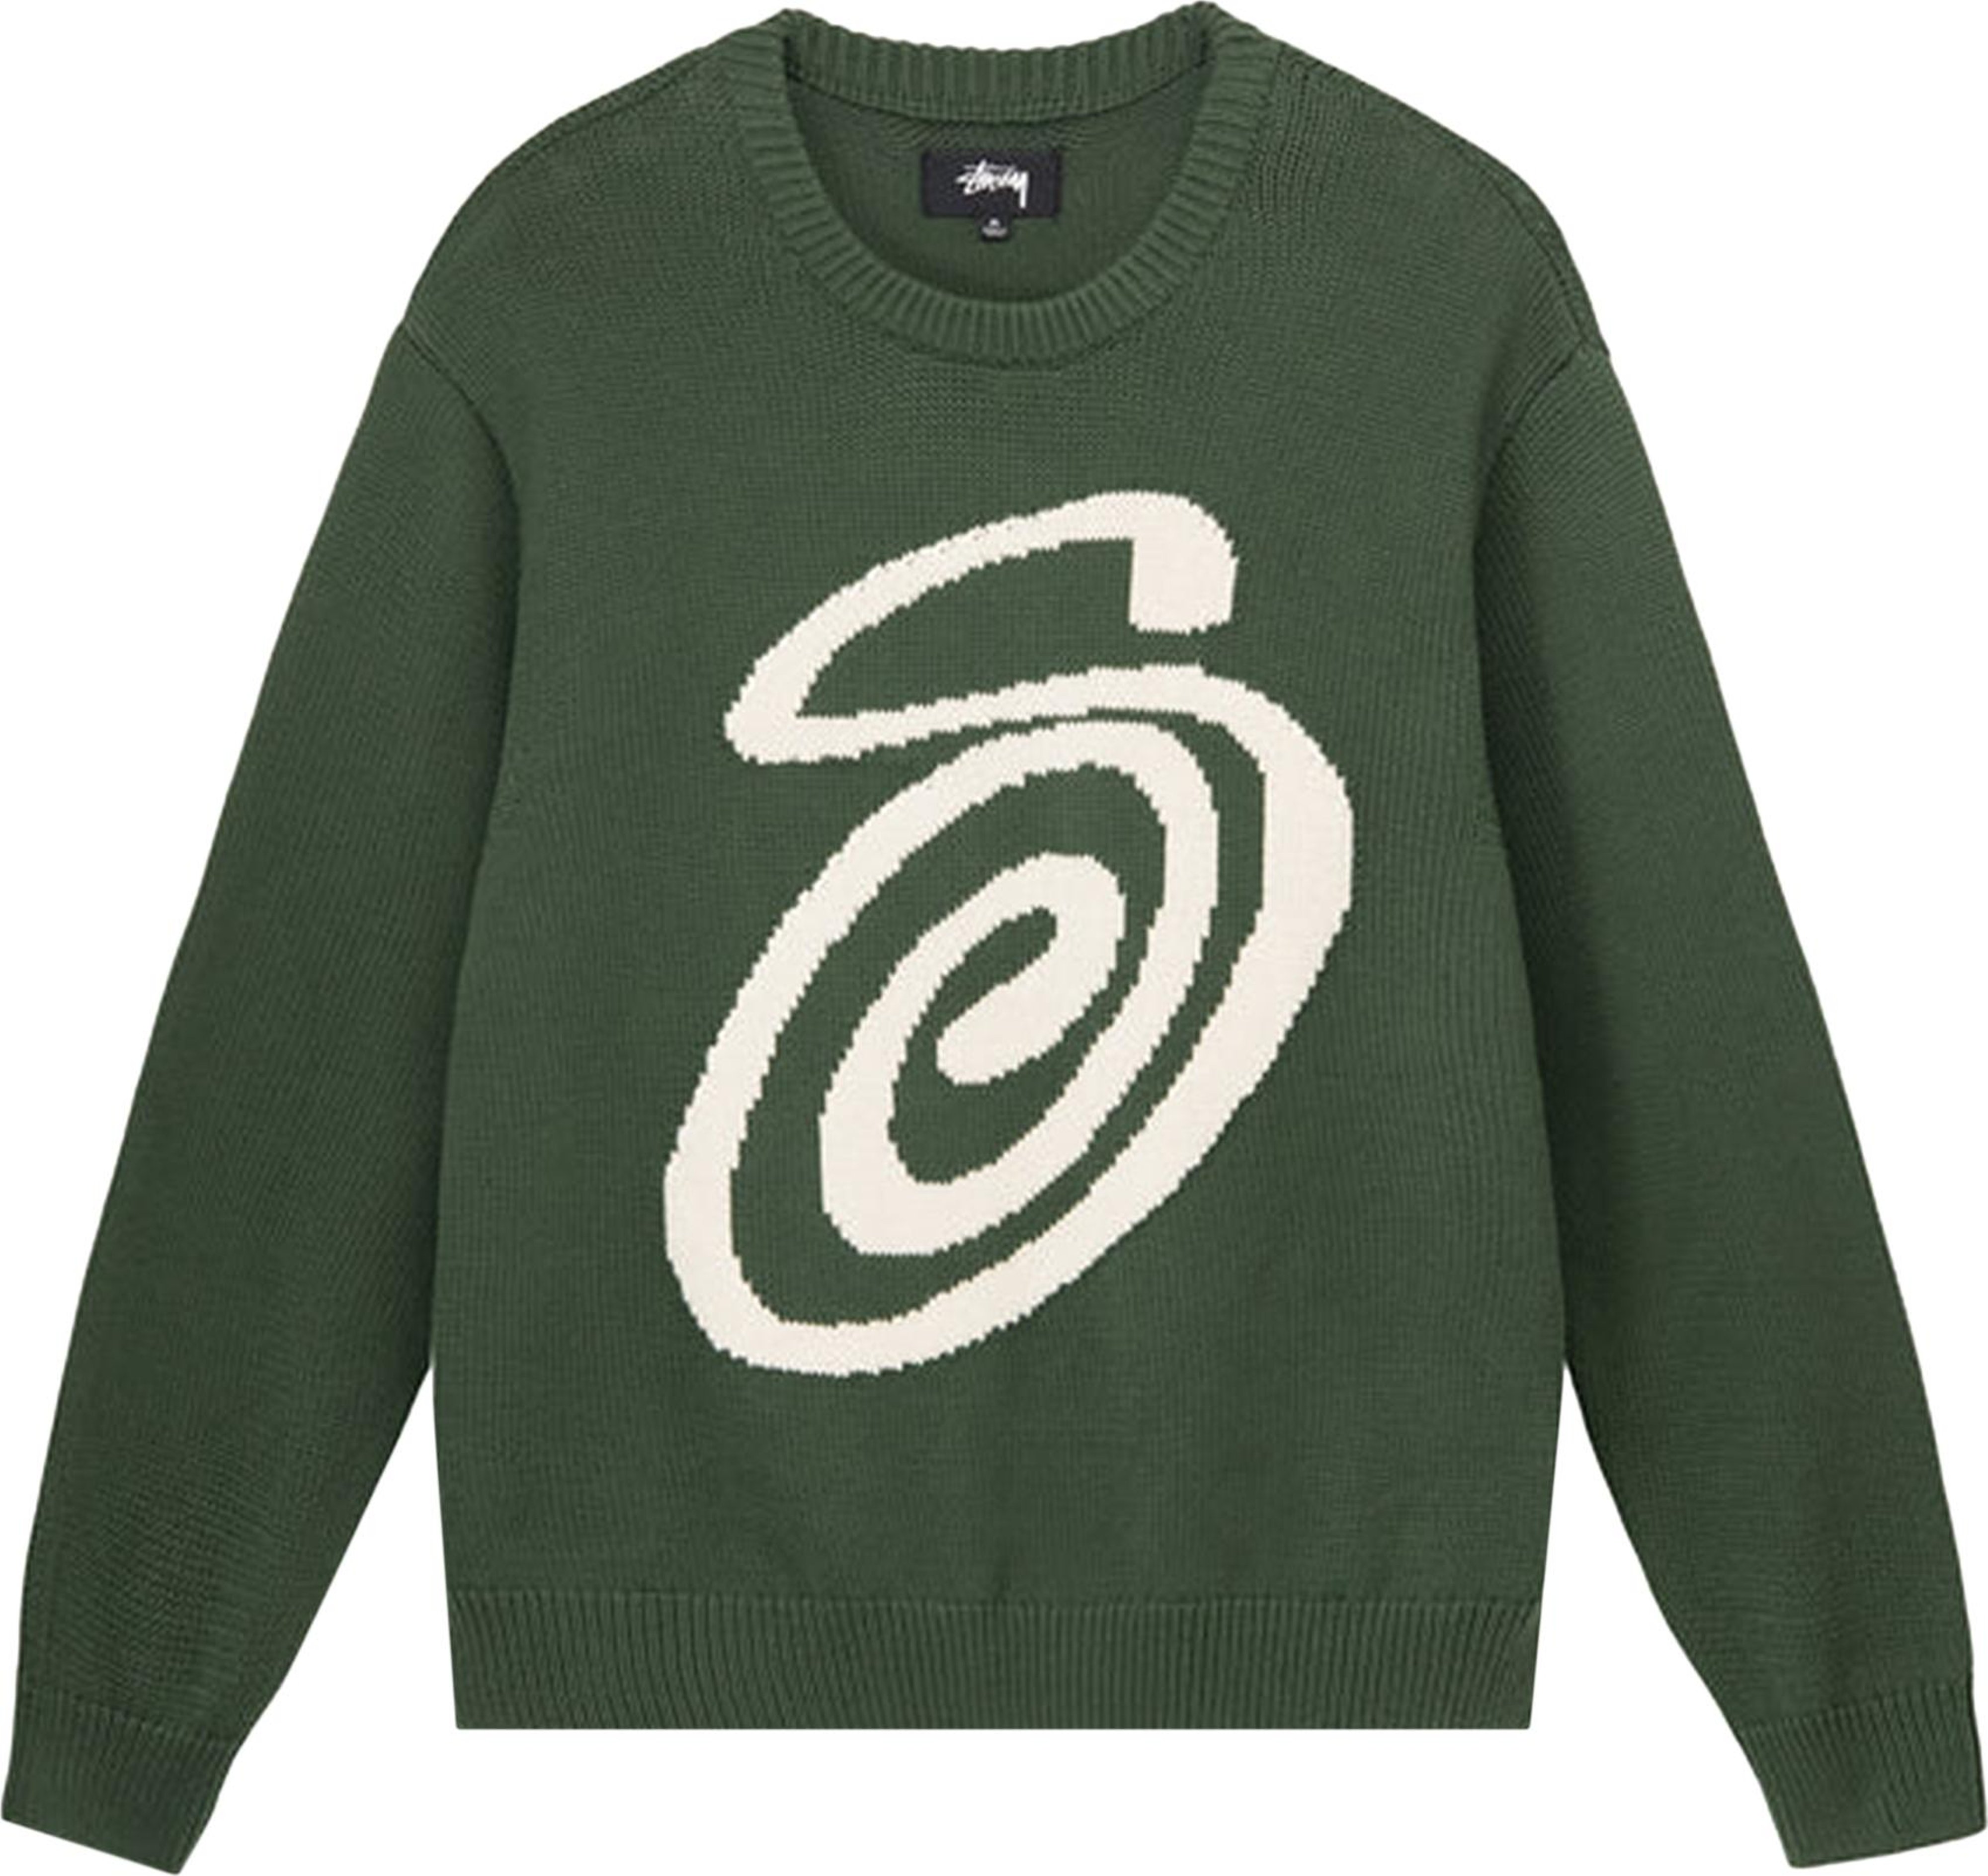 Buy Stussy Curly S Sweater 'Green' - 117073 GREE | GOAT